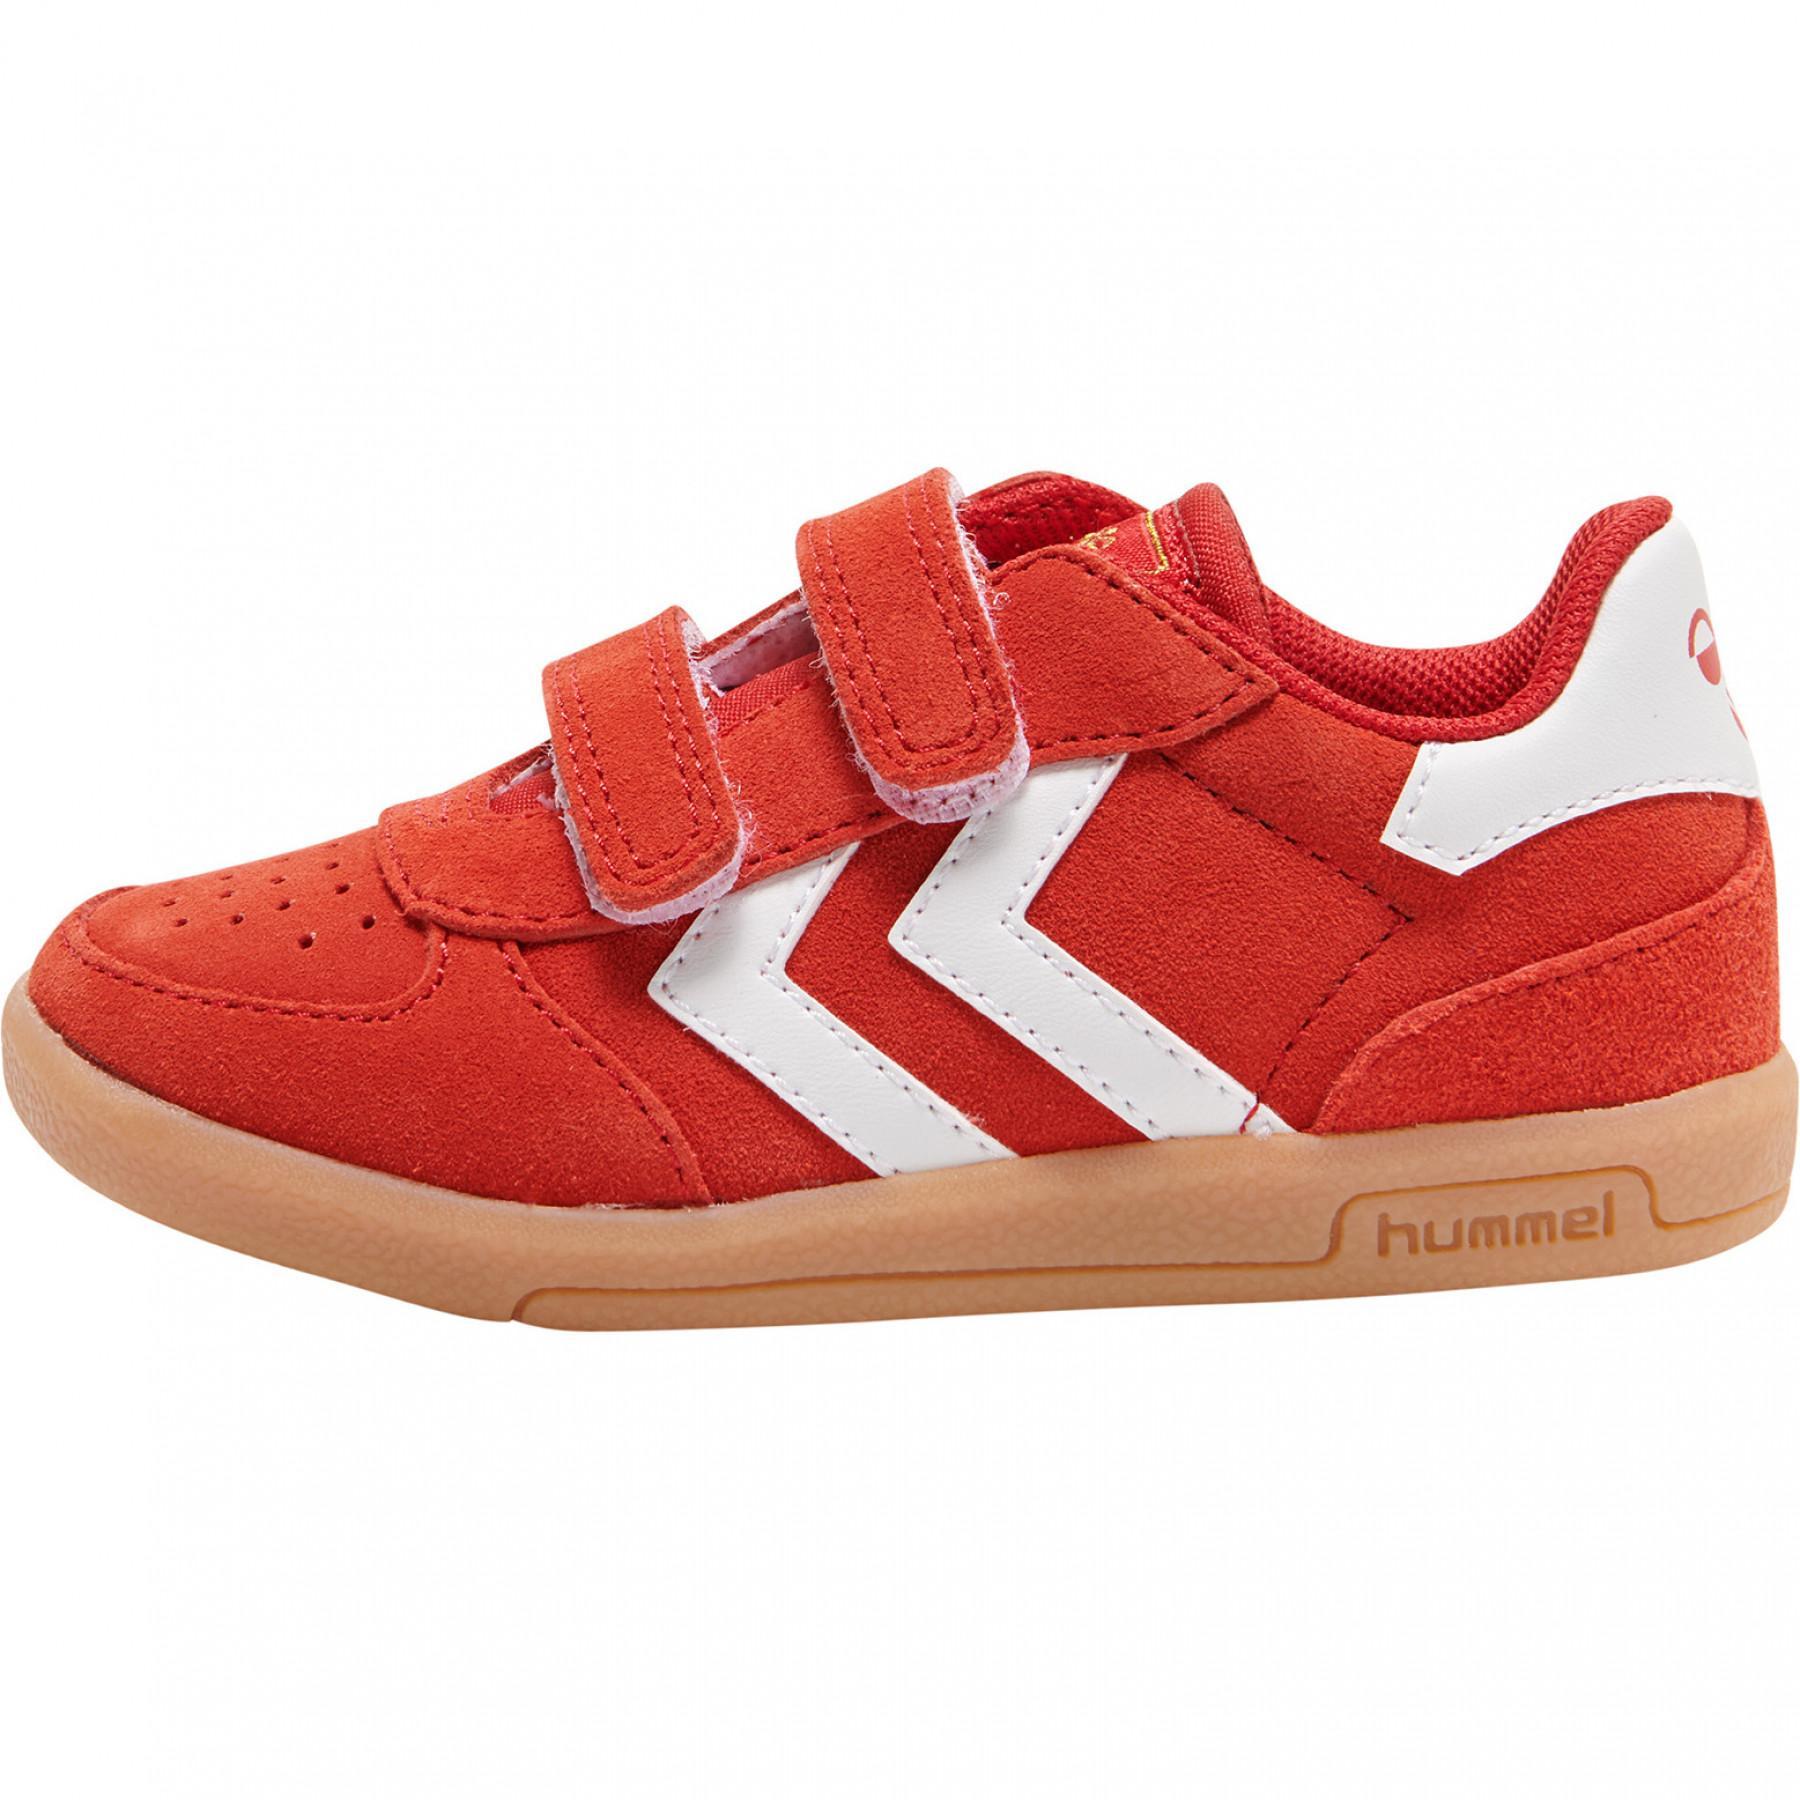 Sneakers Hummel victory suede infant